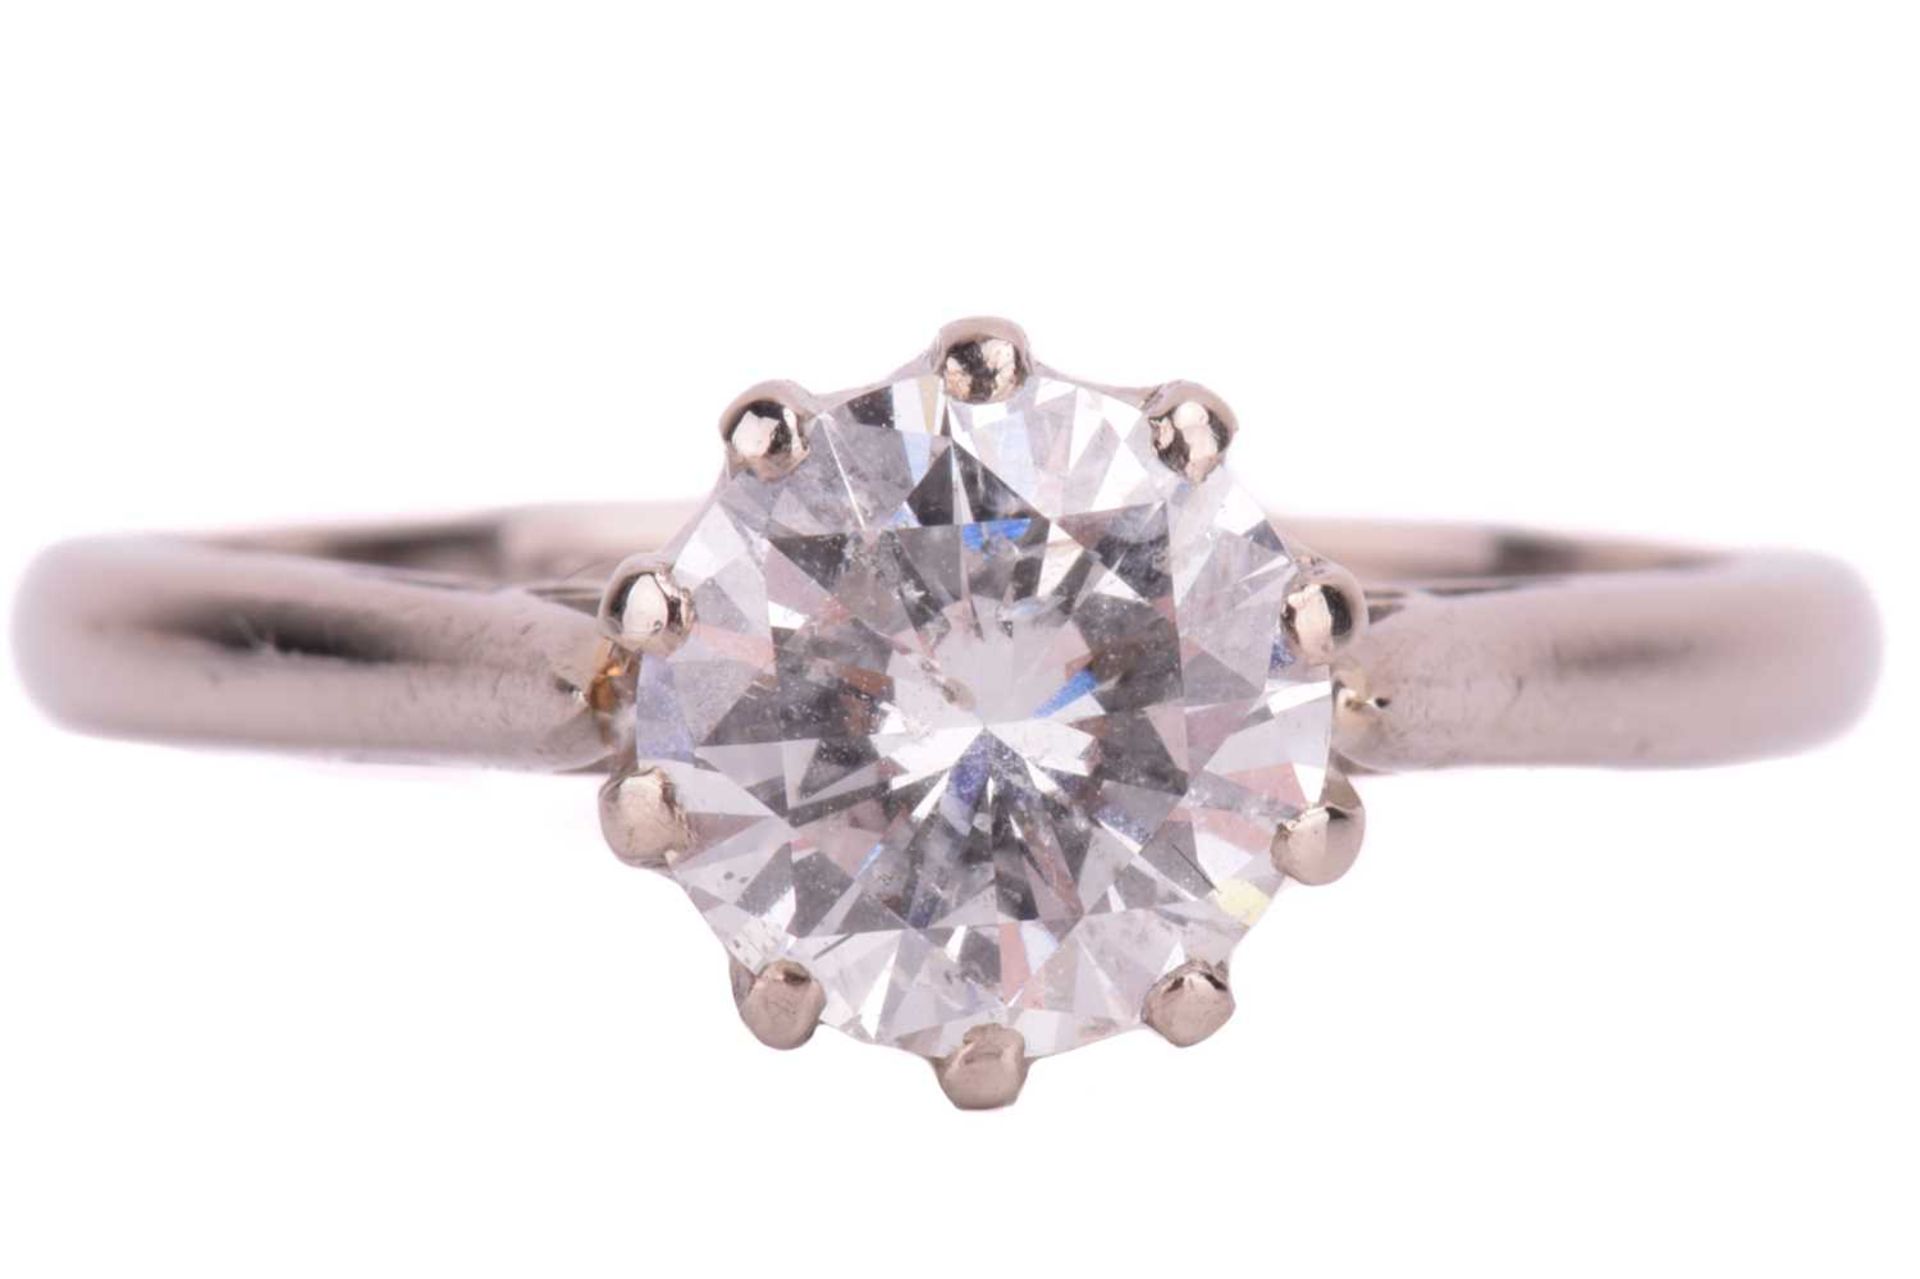 A diamond solitaire ring, set with a round brilliant cut diamond with an estimated weight of 1.